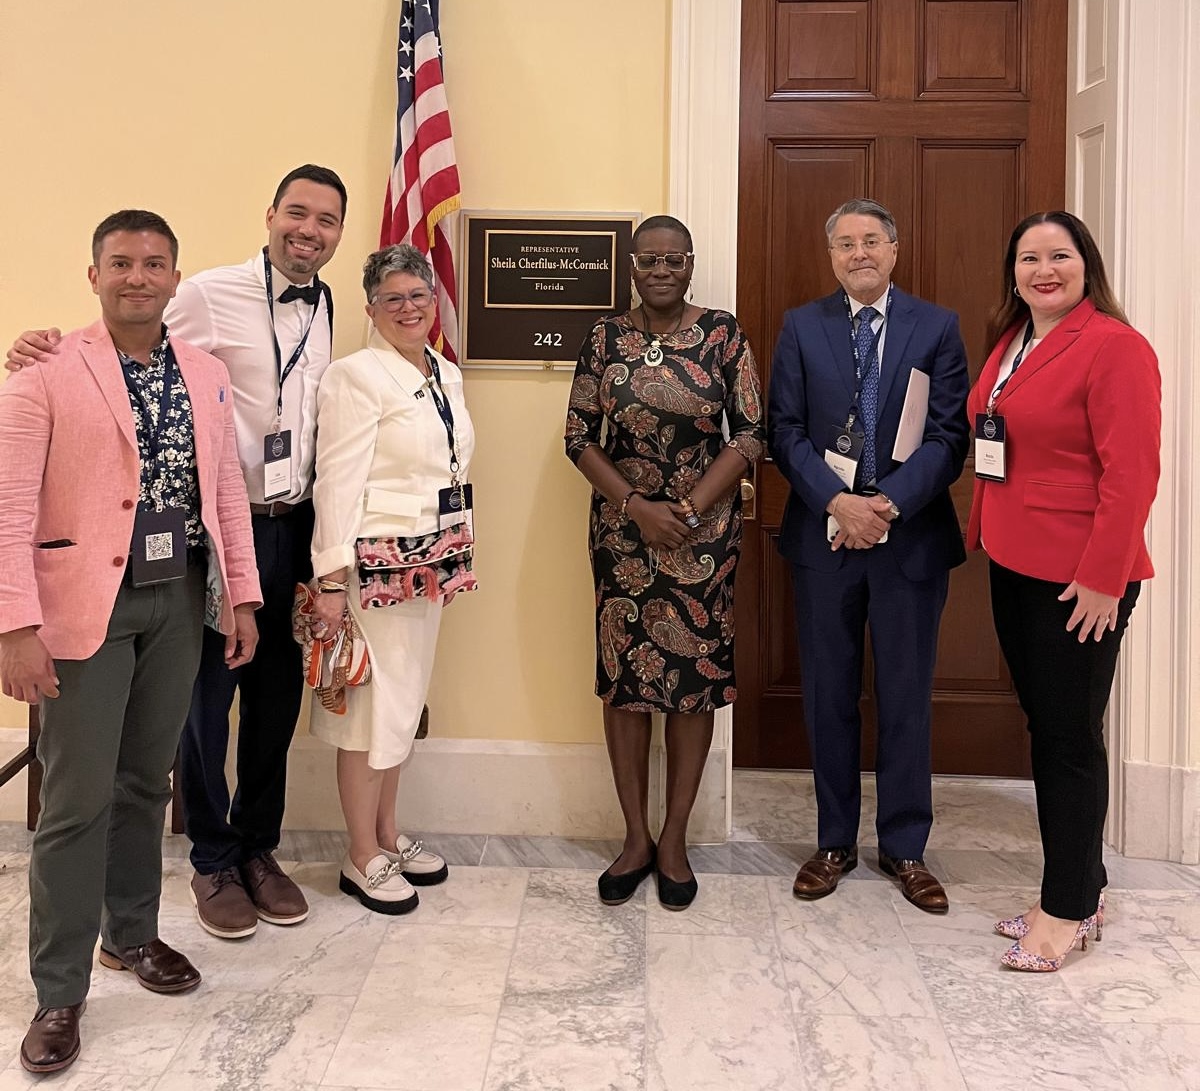 This week, @FIUMedicine Sr. Assoc. Dean 'Yogi' Hernandez-Suarez joins her colleagues from across the country to advocate on the Hill for @NHMAmd agenda. #FIUPopulationHealth